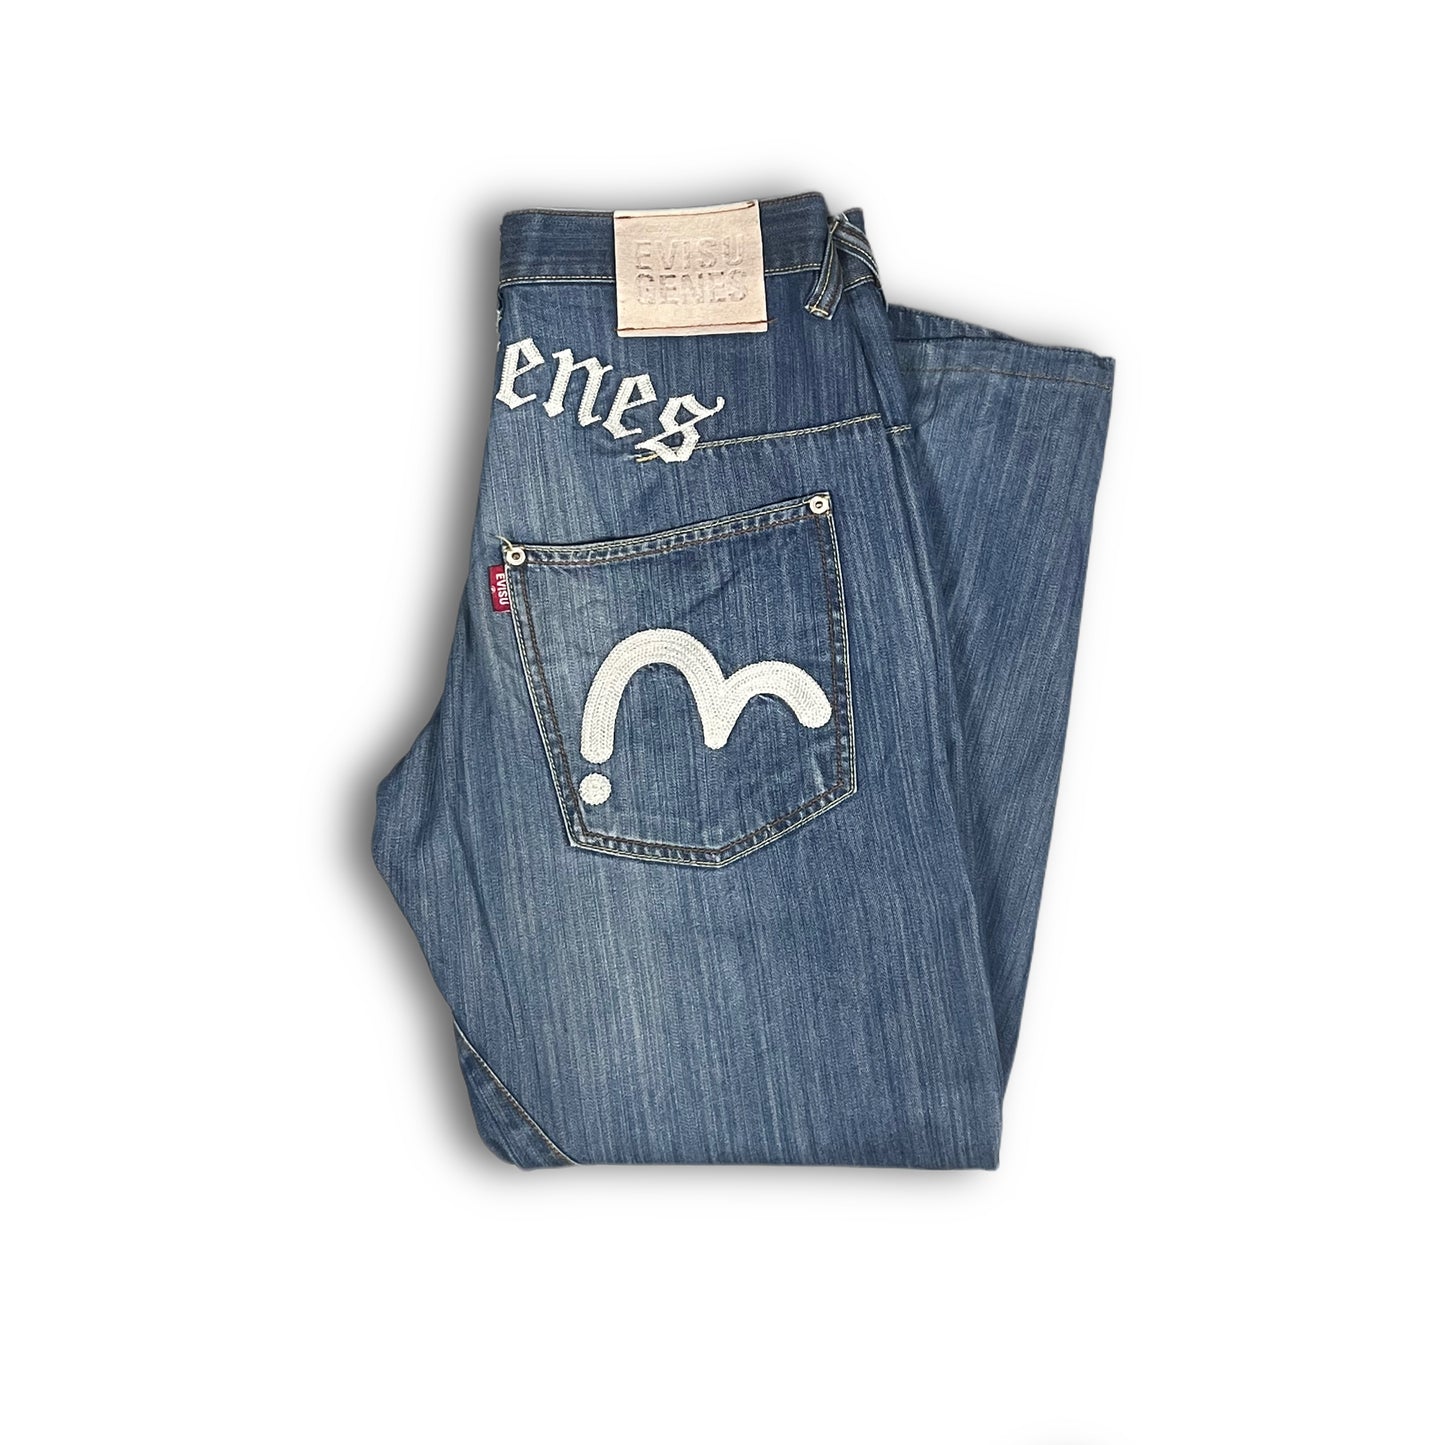 Evisu Genes Jeans Vintage Spell out Back Embroidery